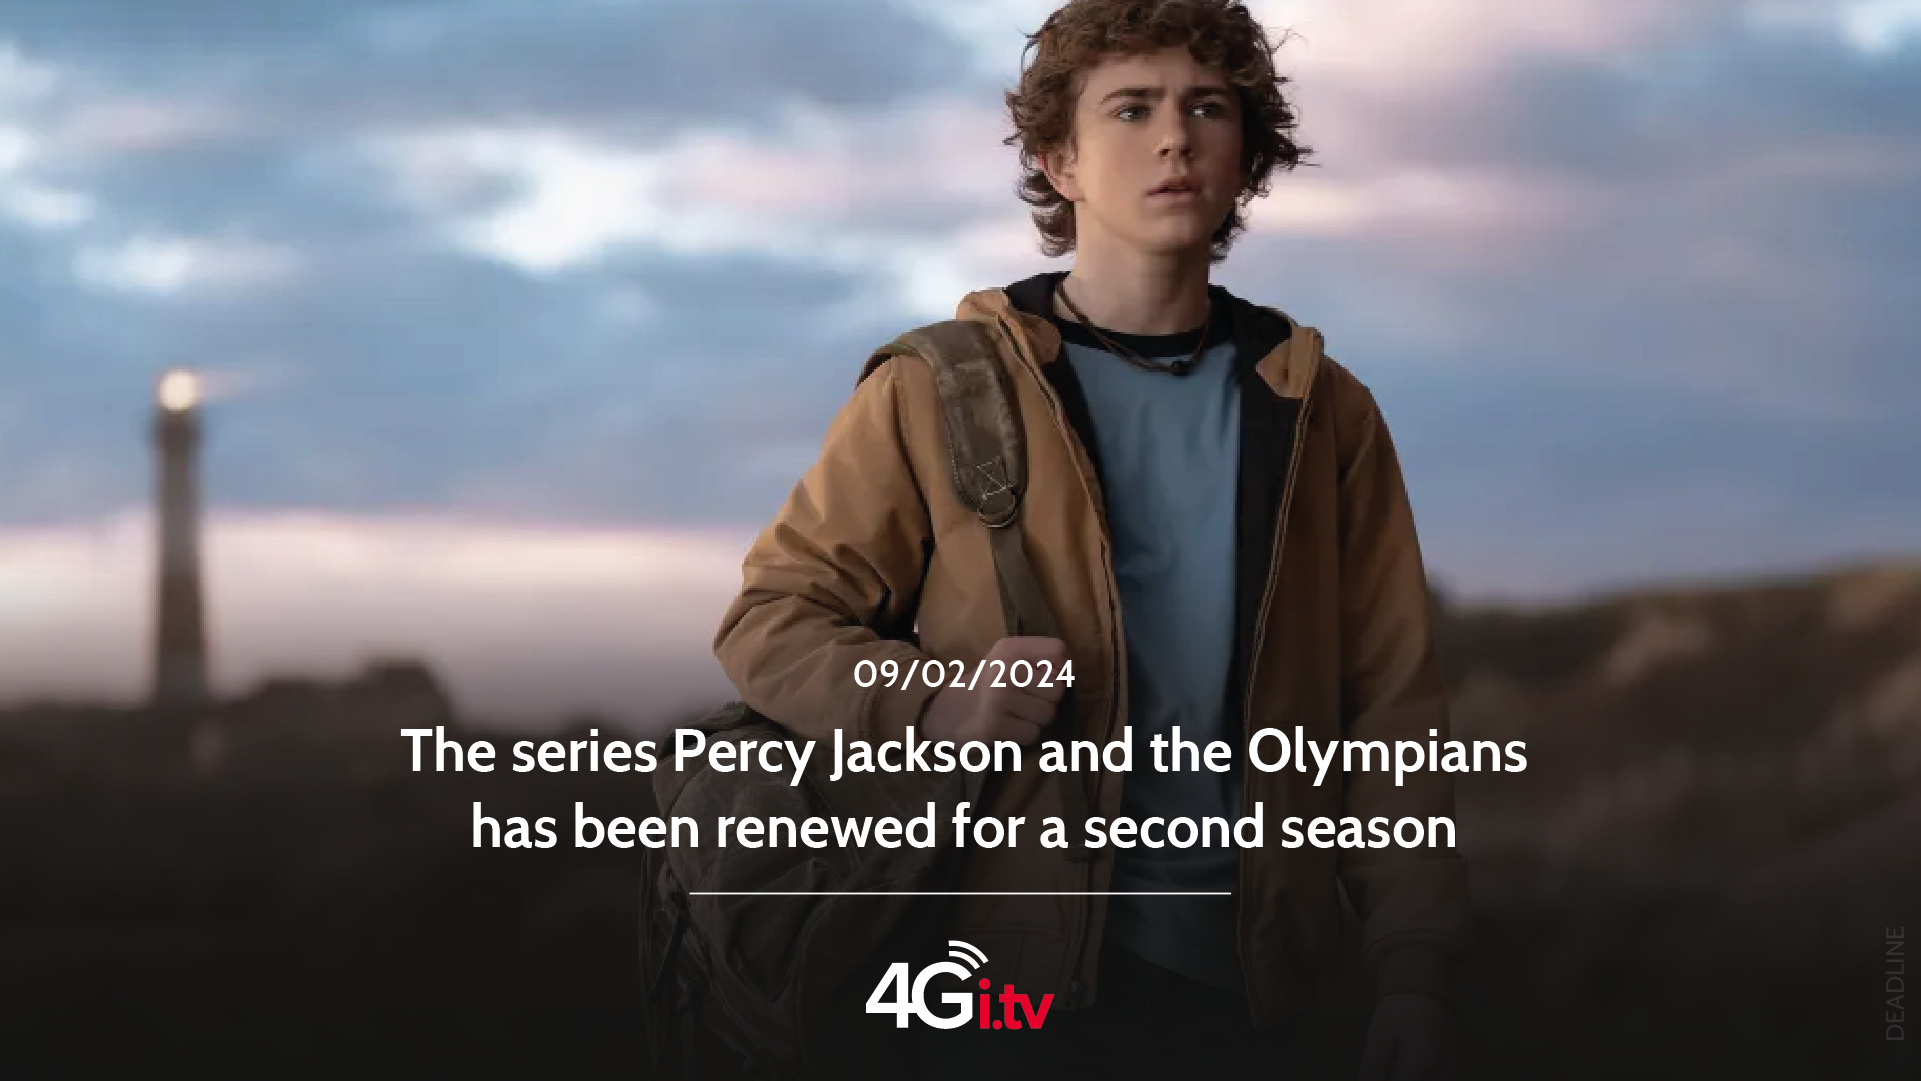 Lesen Sie mehr über den Artikel The series Percy Jackson and the Olympians has been renewed for a second season 